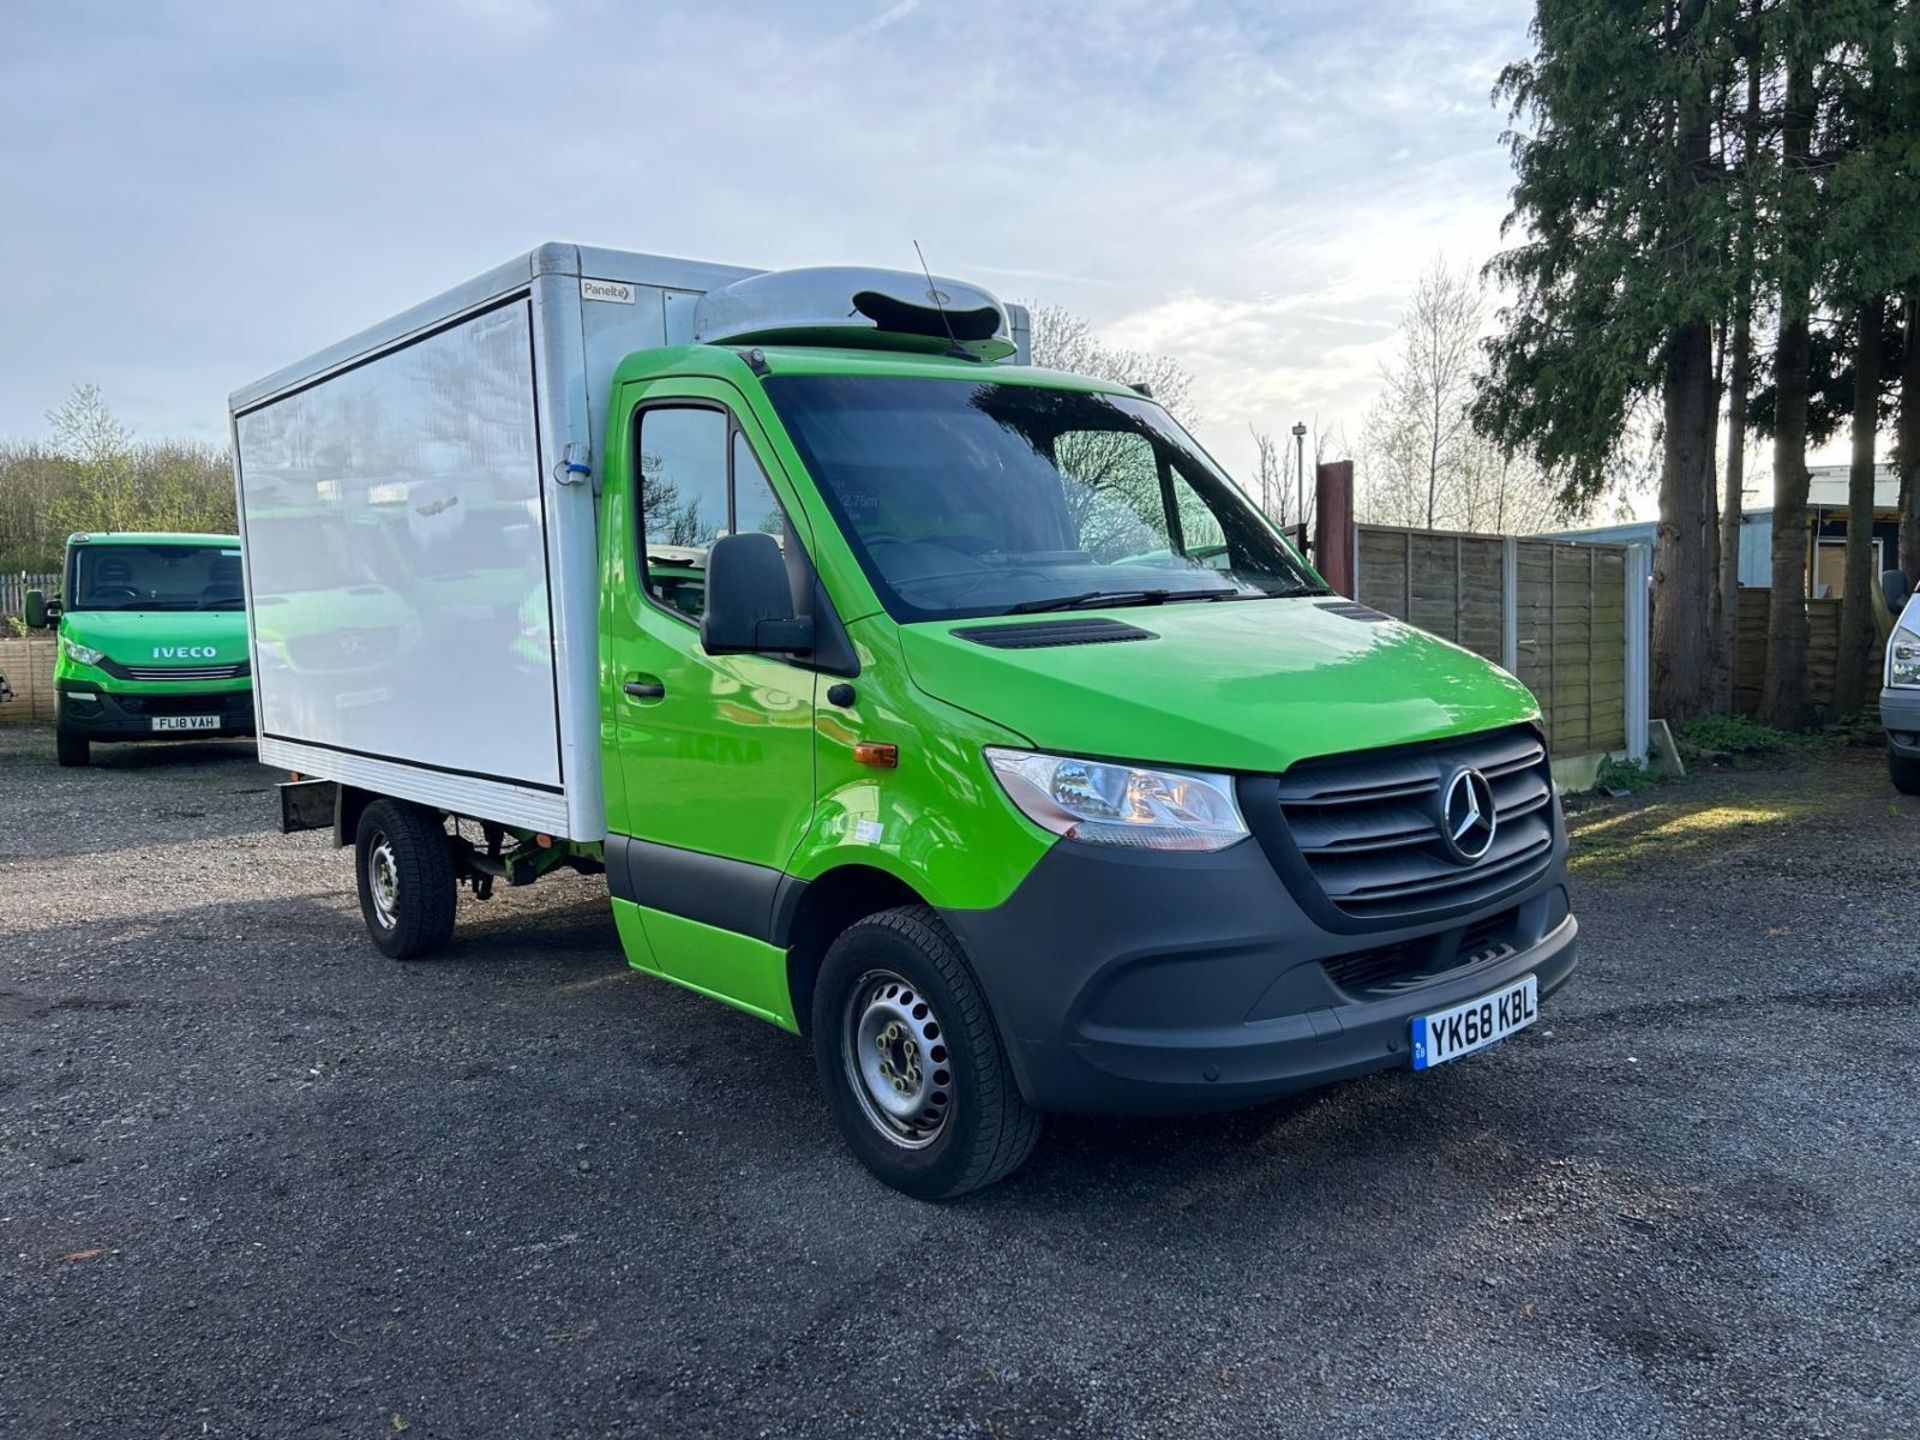 >>>SPECIAL CLEARANCE<<< 2019 MERCEDES-BENZ SPRINTER 314 CDI 35T RWD (ONLY 88K MILES)